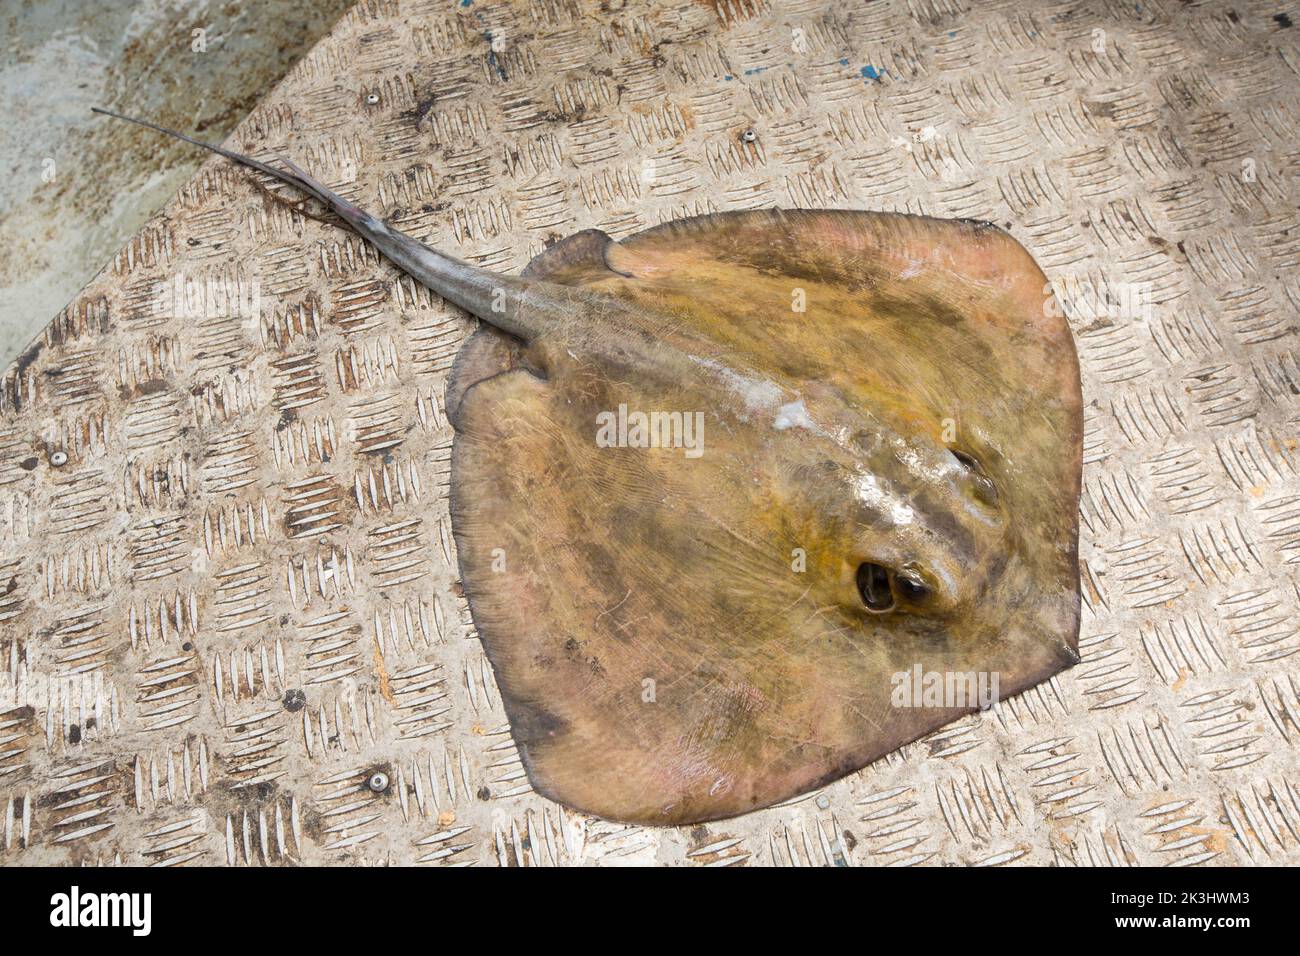 A sting ray, Dasyatis pastinaca, on the deck of a fishing boat before being released. Sting rays possess a venomous, barbed stinger, or harpoon, on th Stock Photo